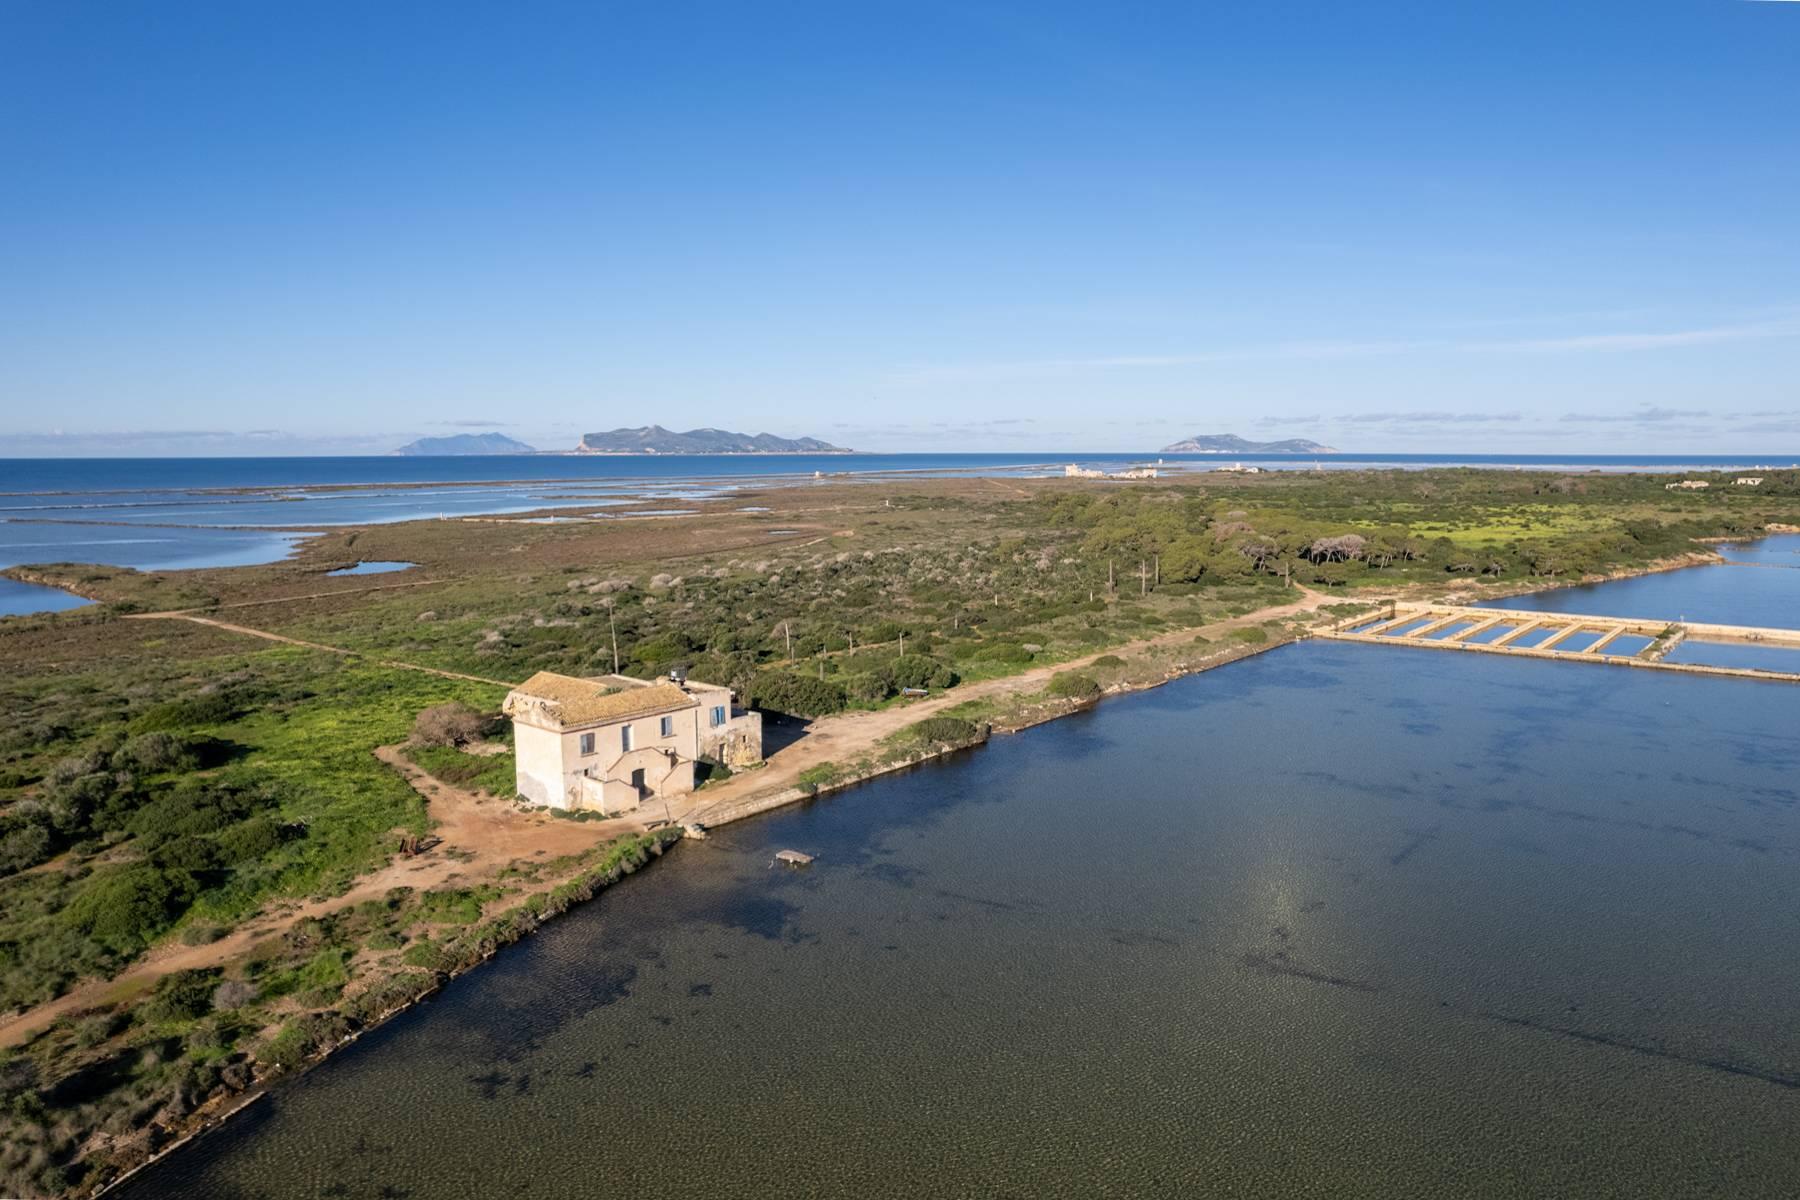 Pied dan s l'eau historic residence on Isola Lunga with private landing stage - 4